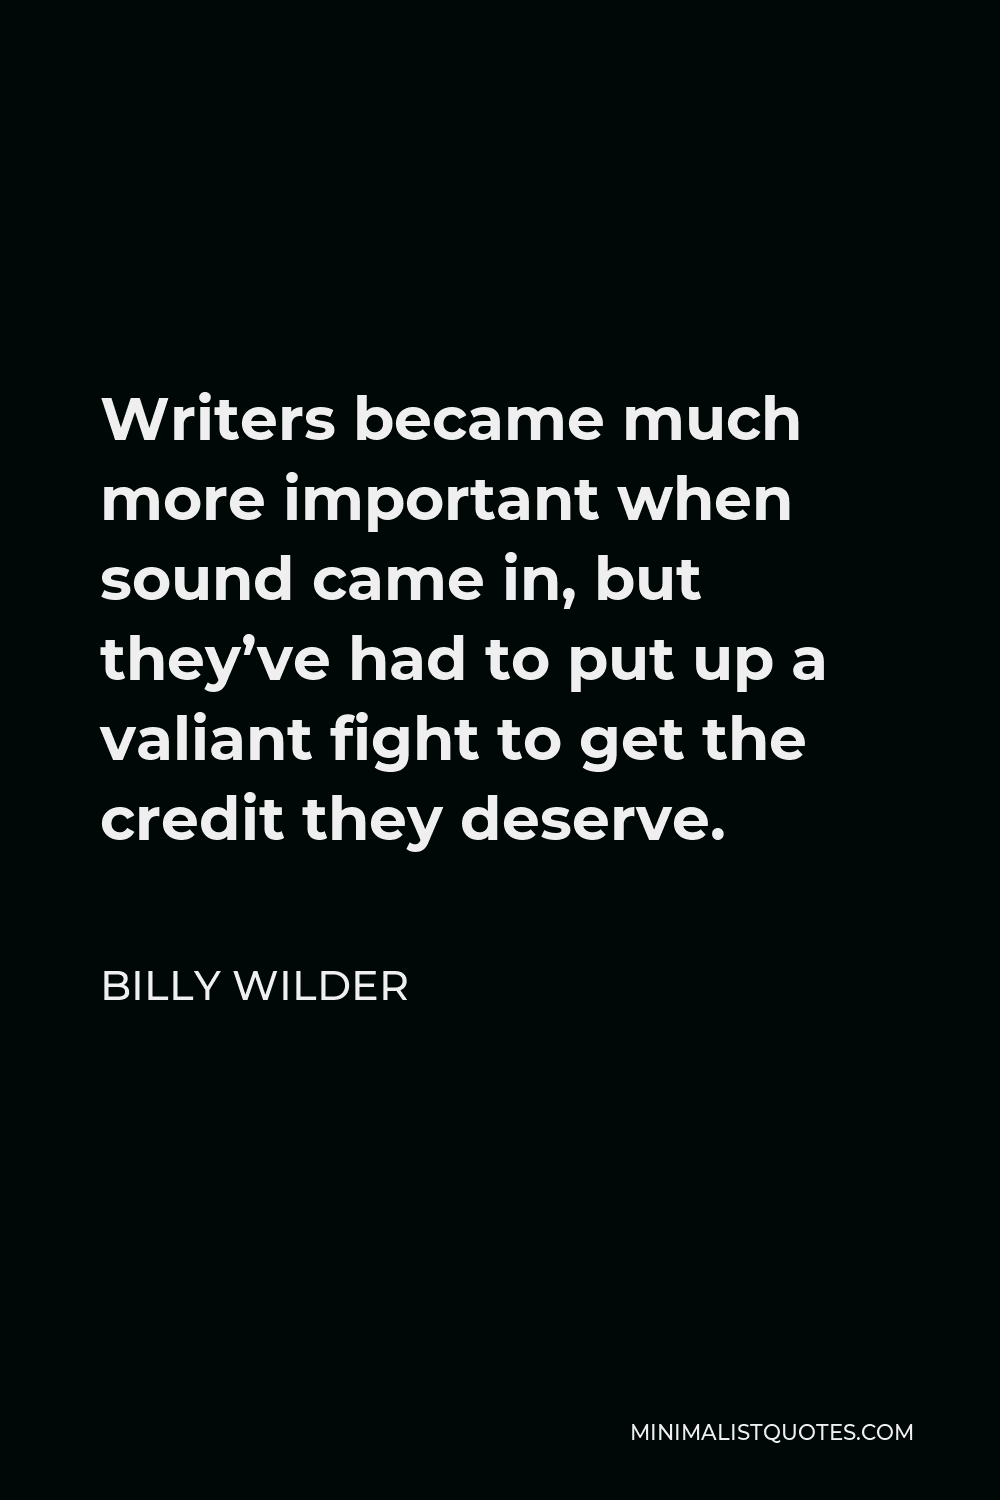 Billy Wilder Quote - Writers became much more important when sound came in, but they’ve had to put up a valiant fight to get the credit they deserve.